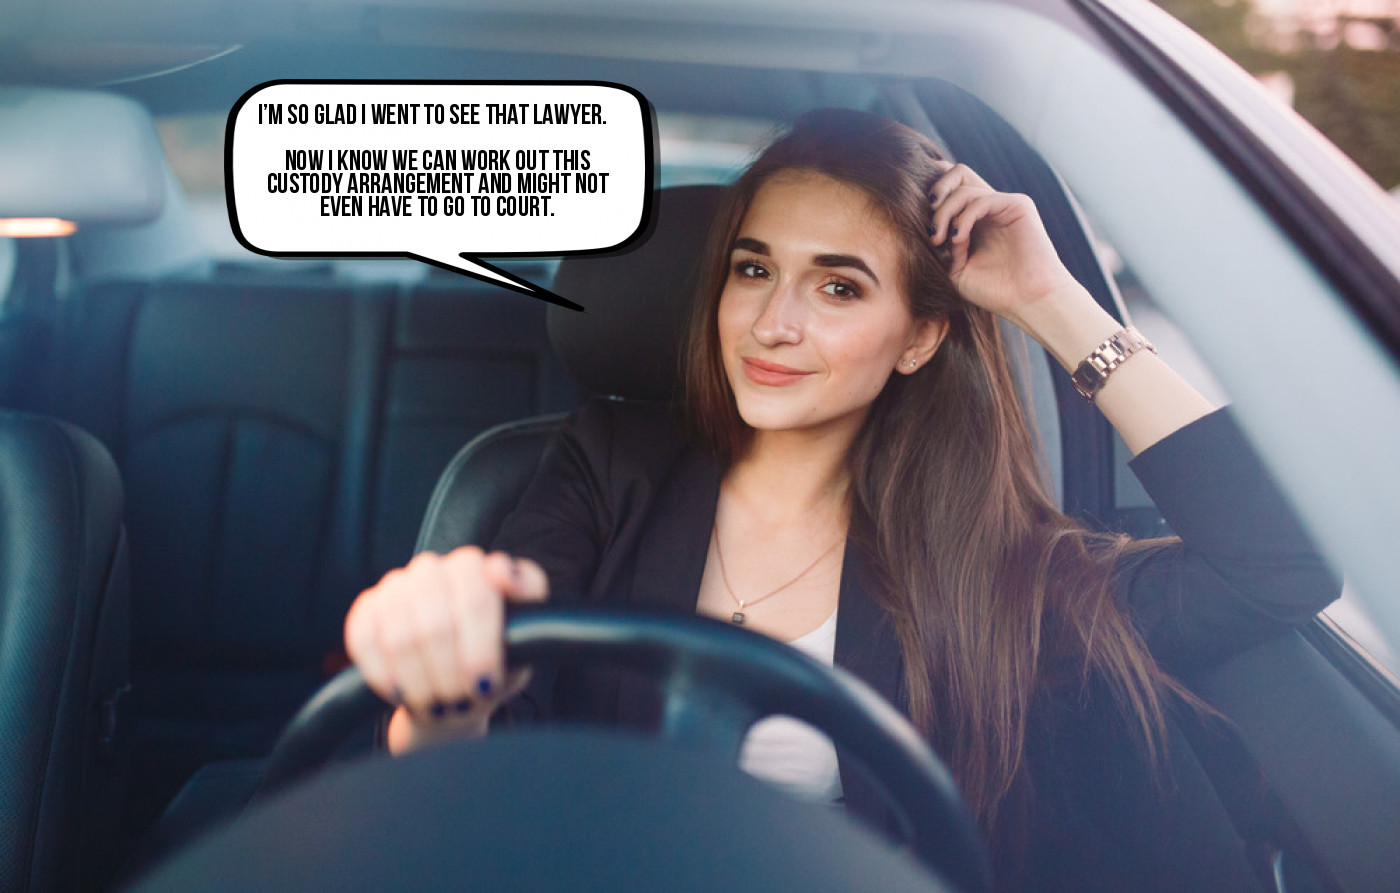 A confident woman driver smiles while resting her hand on her head, contemplating a successful legal consultation regarding joint custody in Texas.